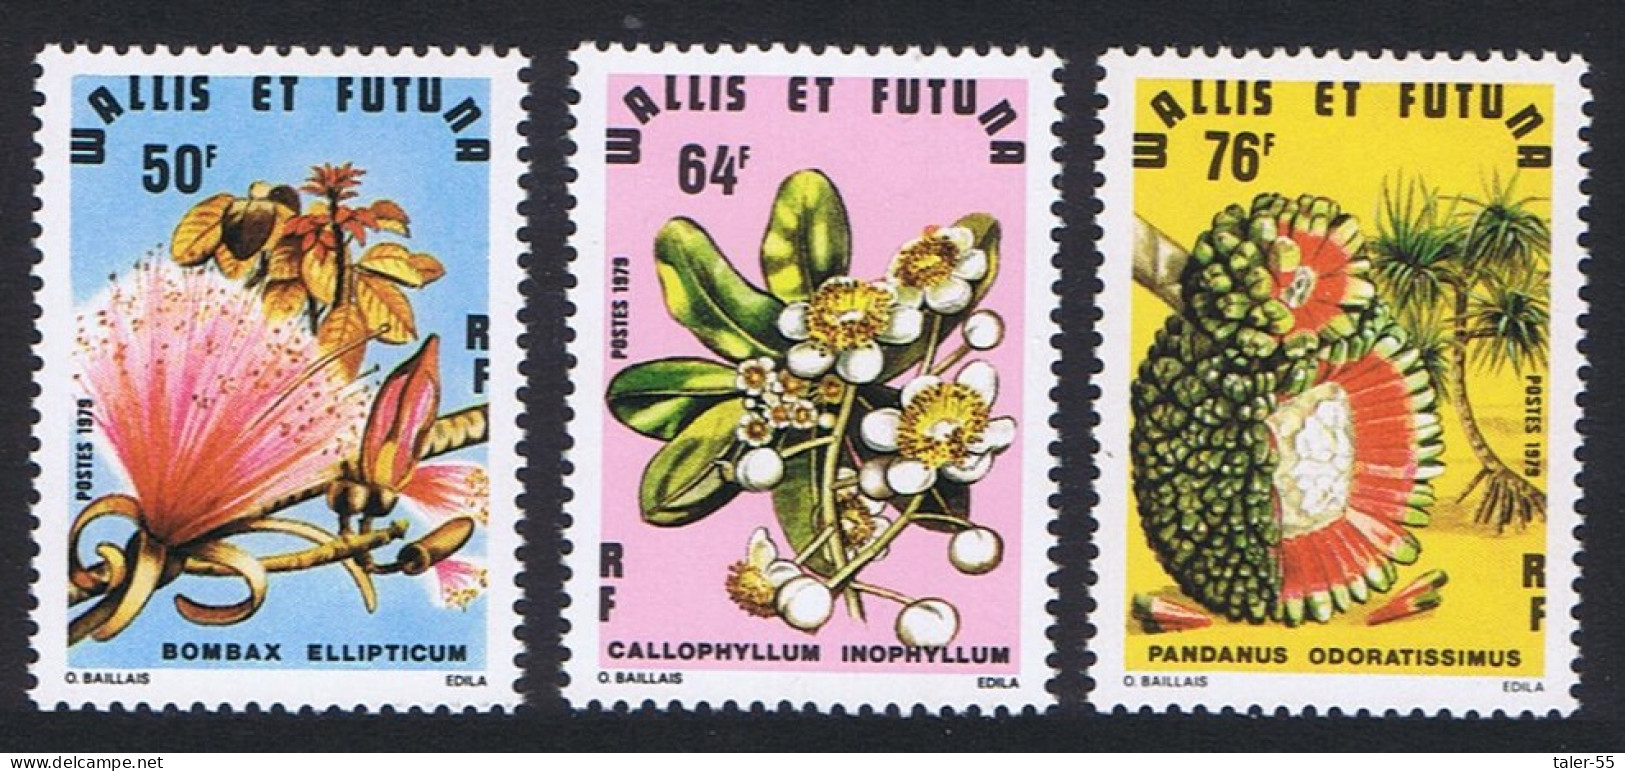 Wallis And Futuna Flowering Trees 3v 1979 MNH SG#319-321 Sc#231-233 - Unused Stamps